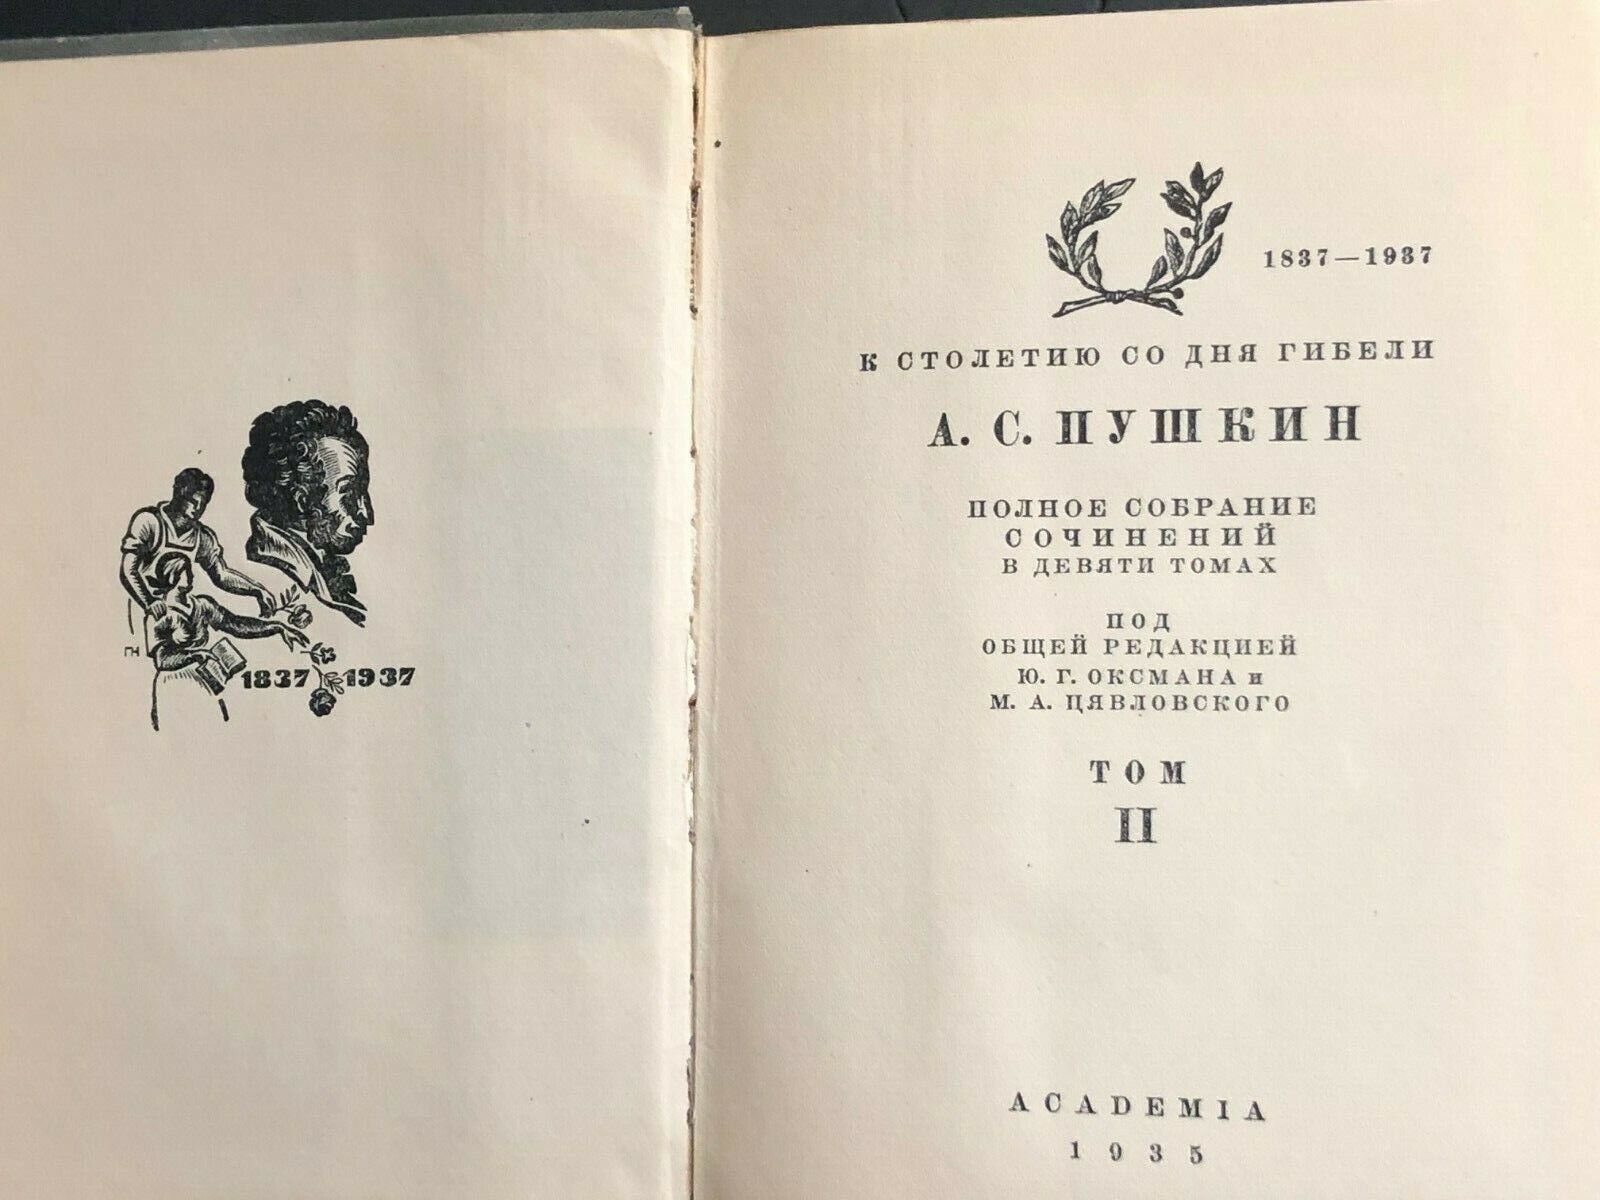 A. PUSHKIN 1935-1937 EDITION COMPLETE WORKS IN 9 MINI VOLUMES WITH COMMENTARIES Без бренда - фотография #3